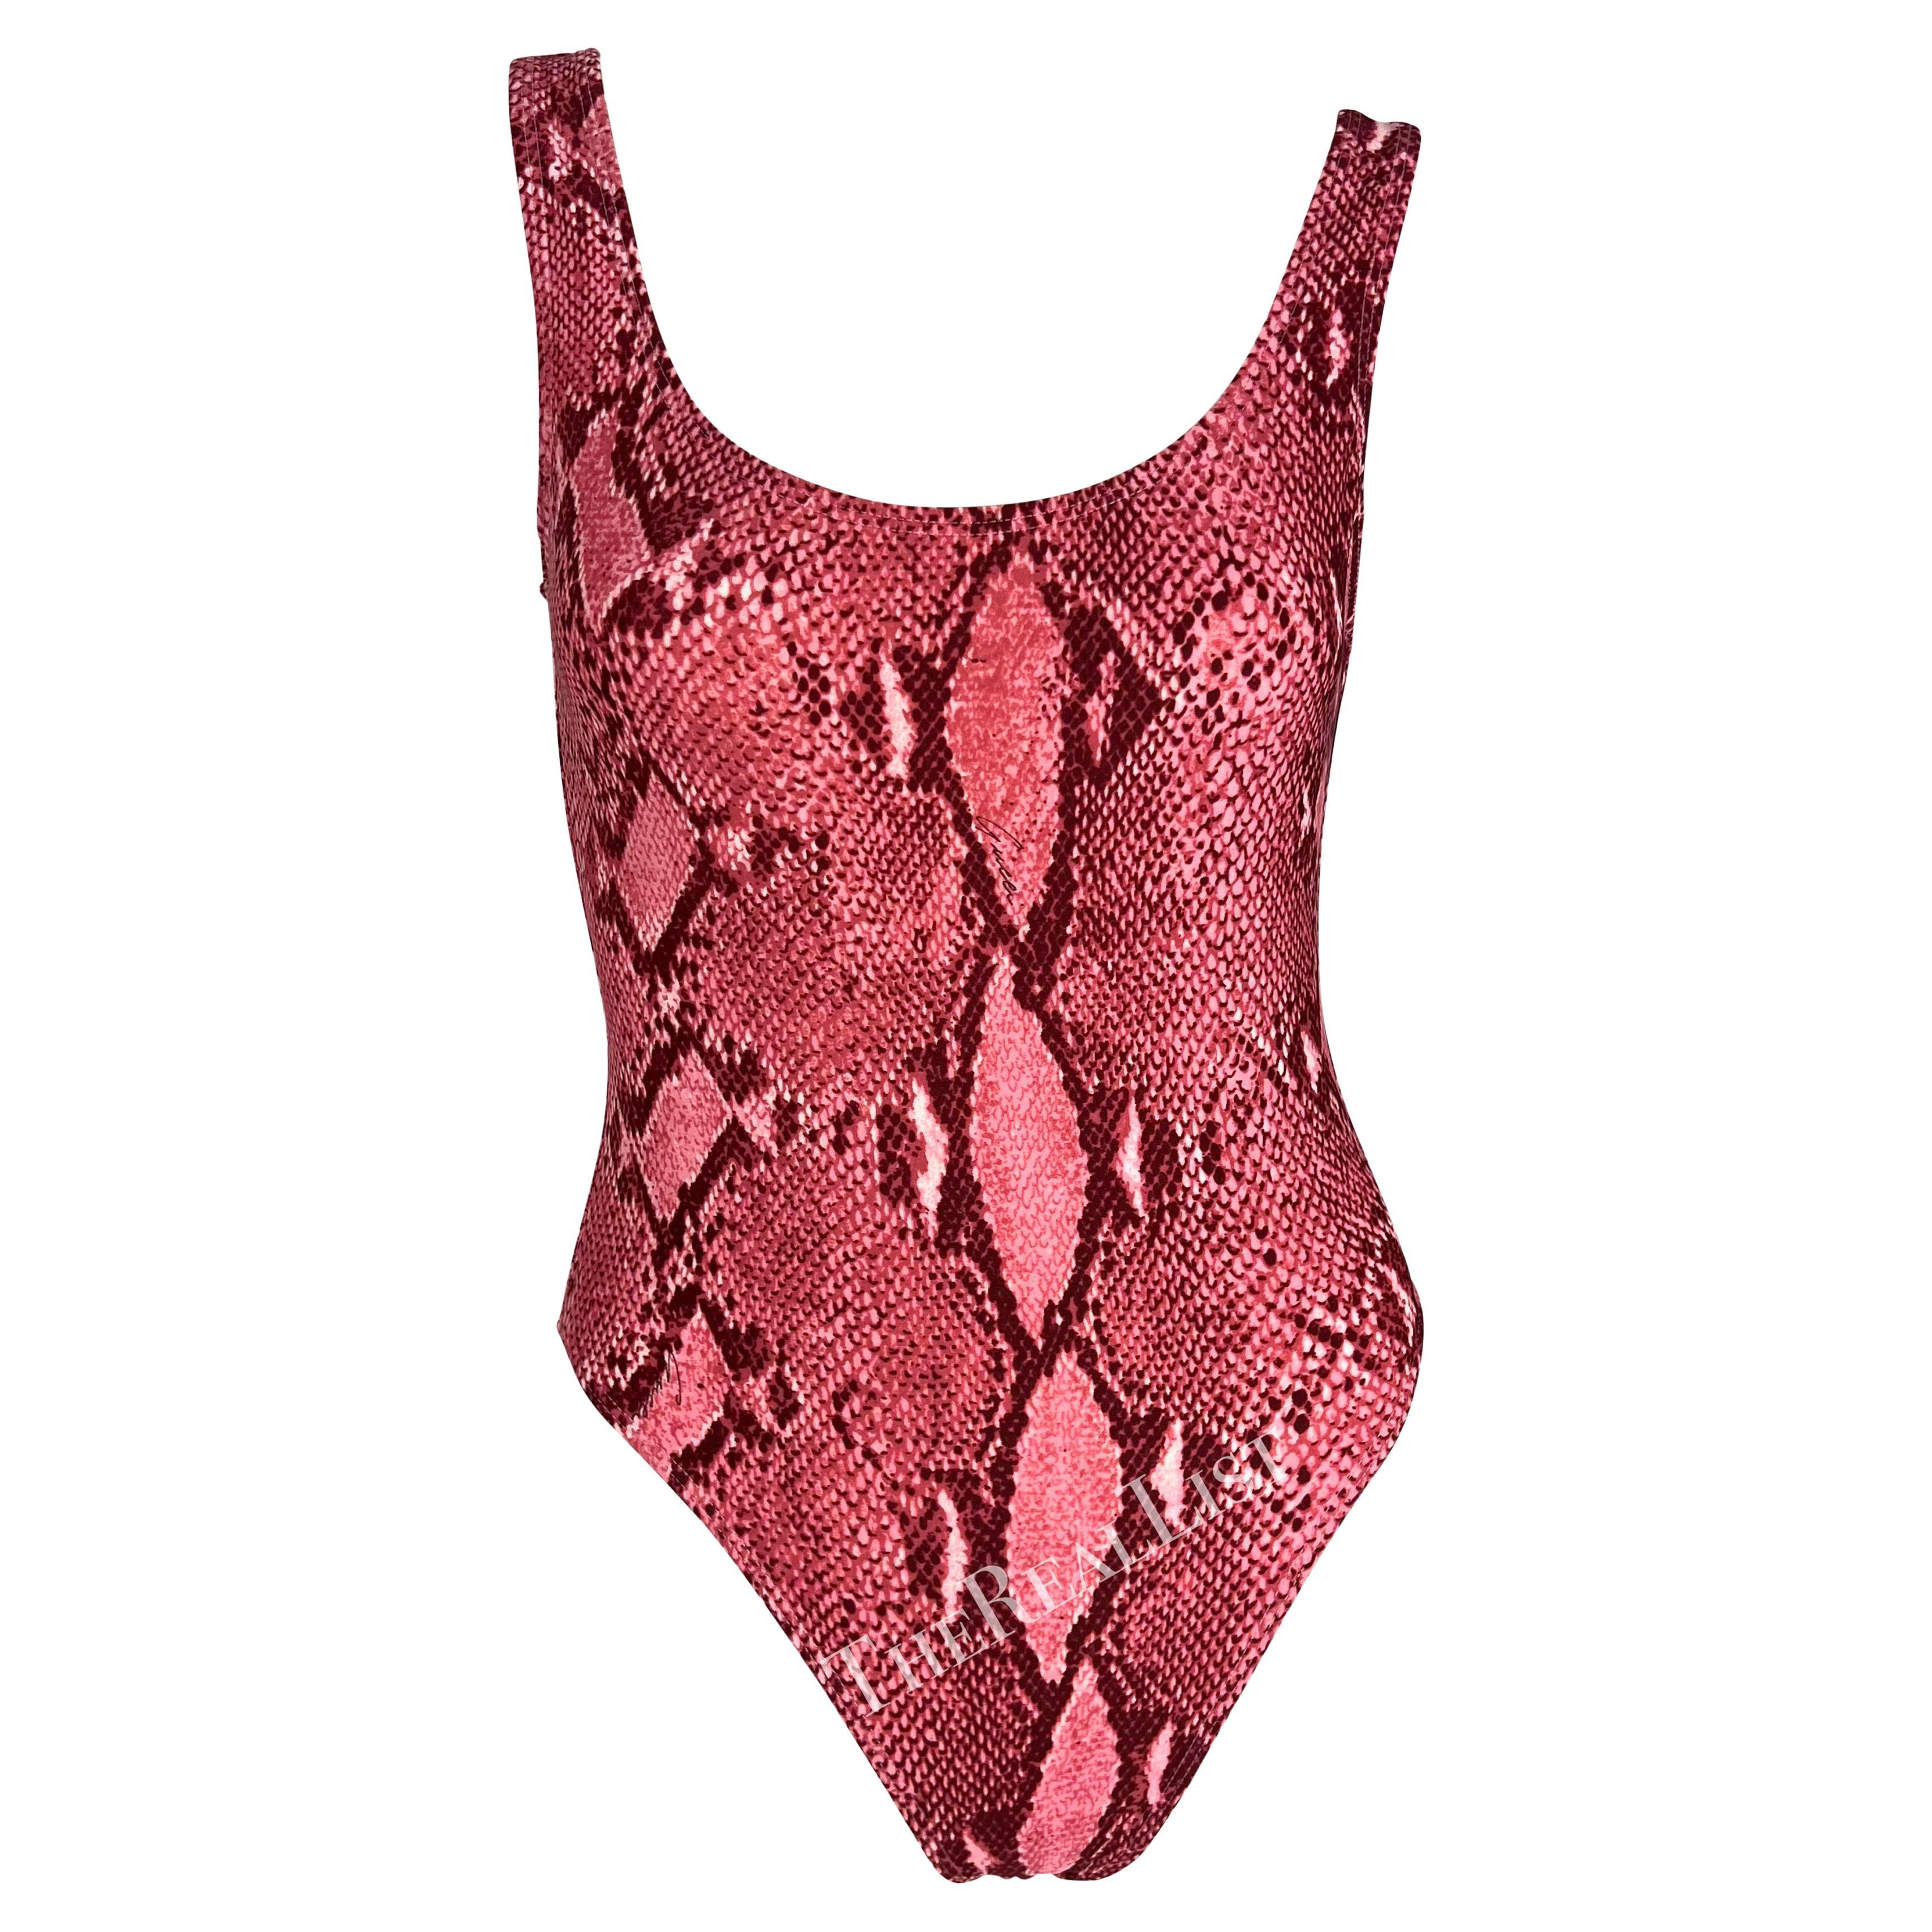 S/S 2000 Gucci by Tom Ford Pink Snakeskin Print One Piece Swimsuit Bodysuit For Sale